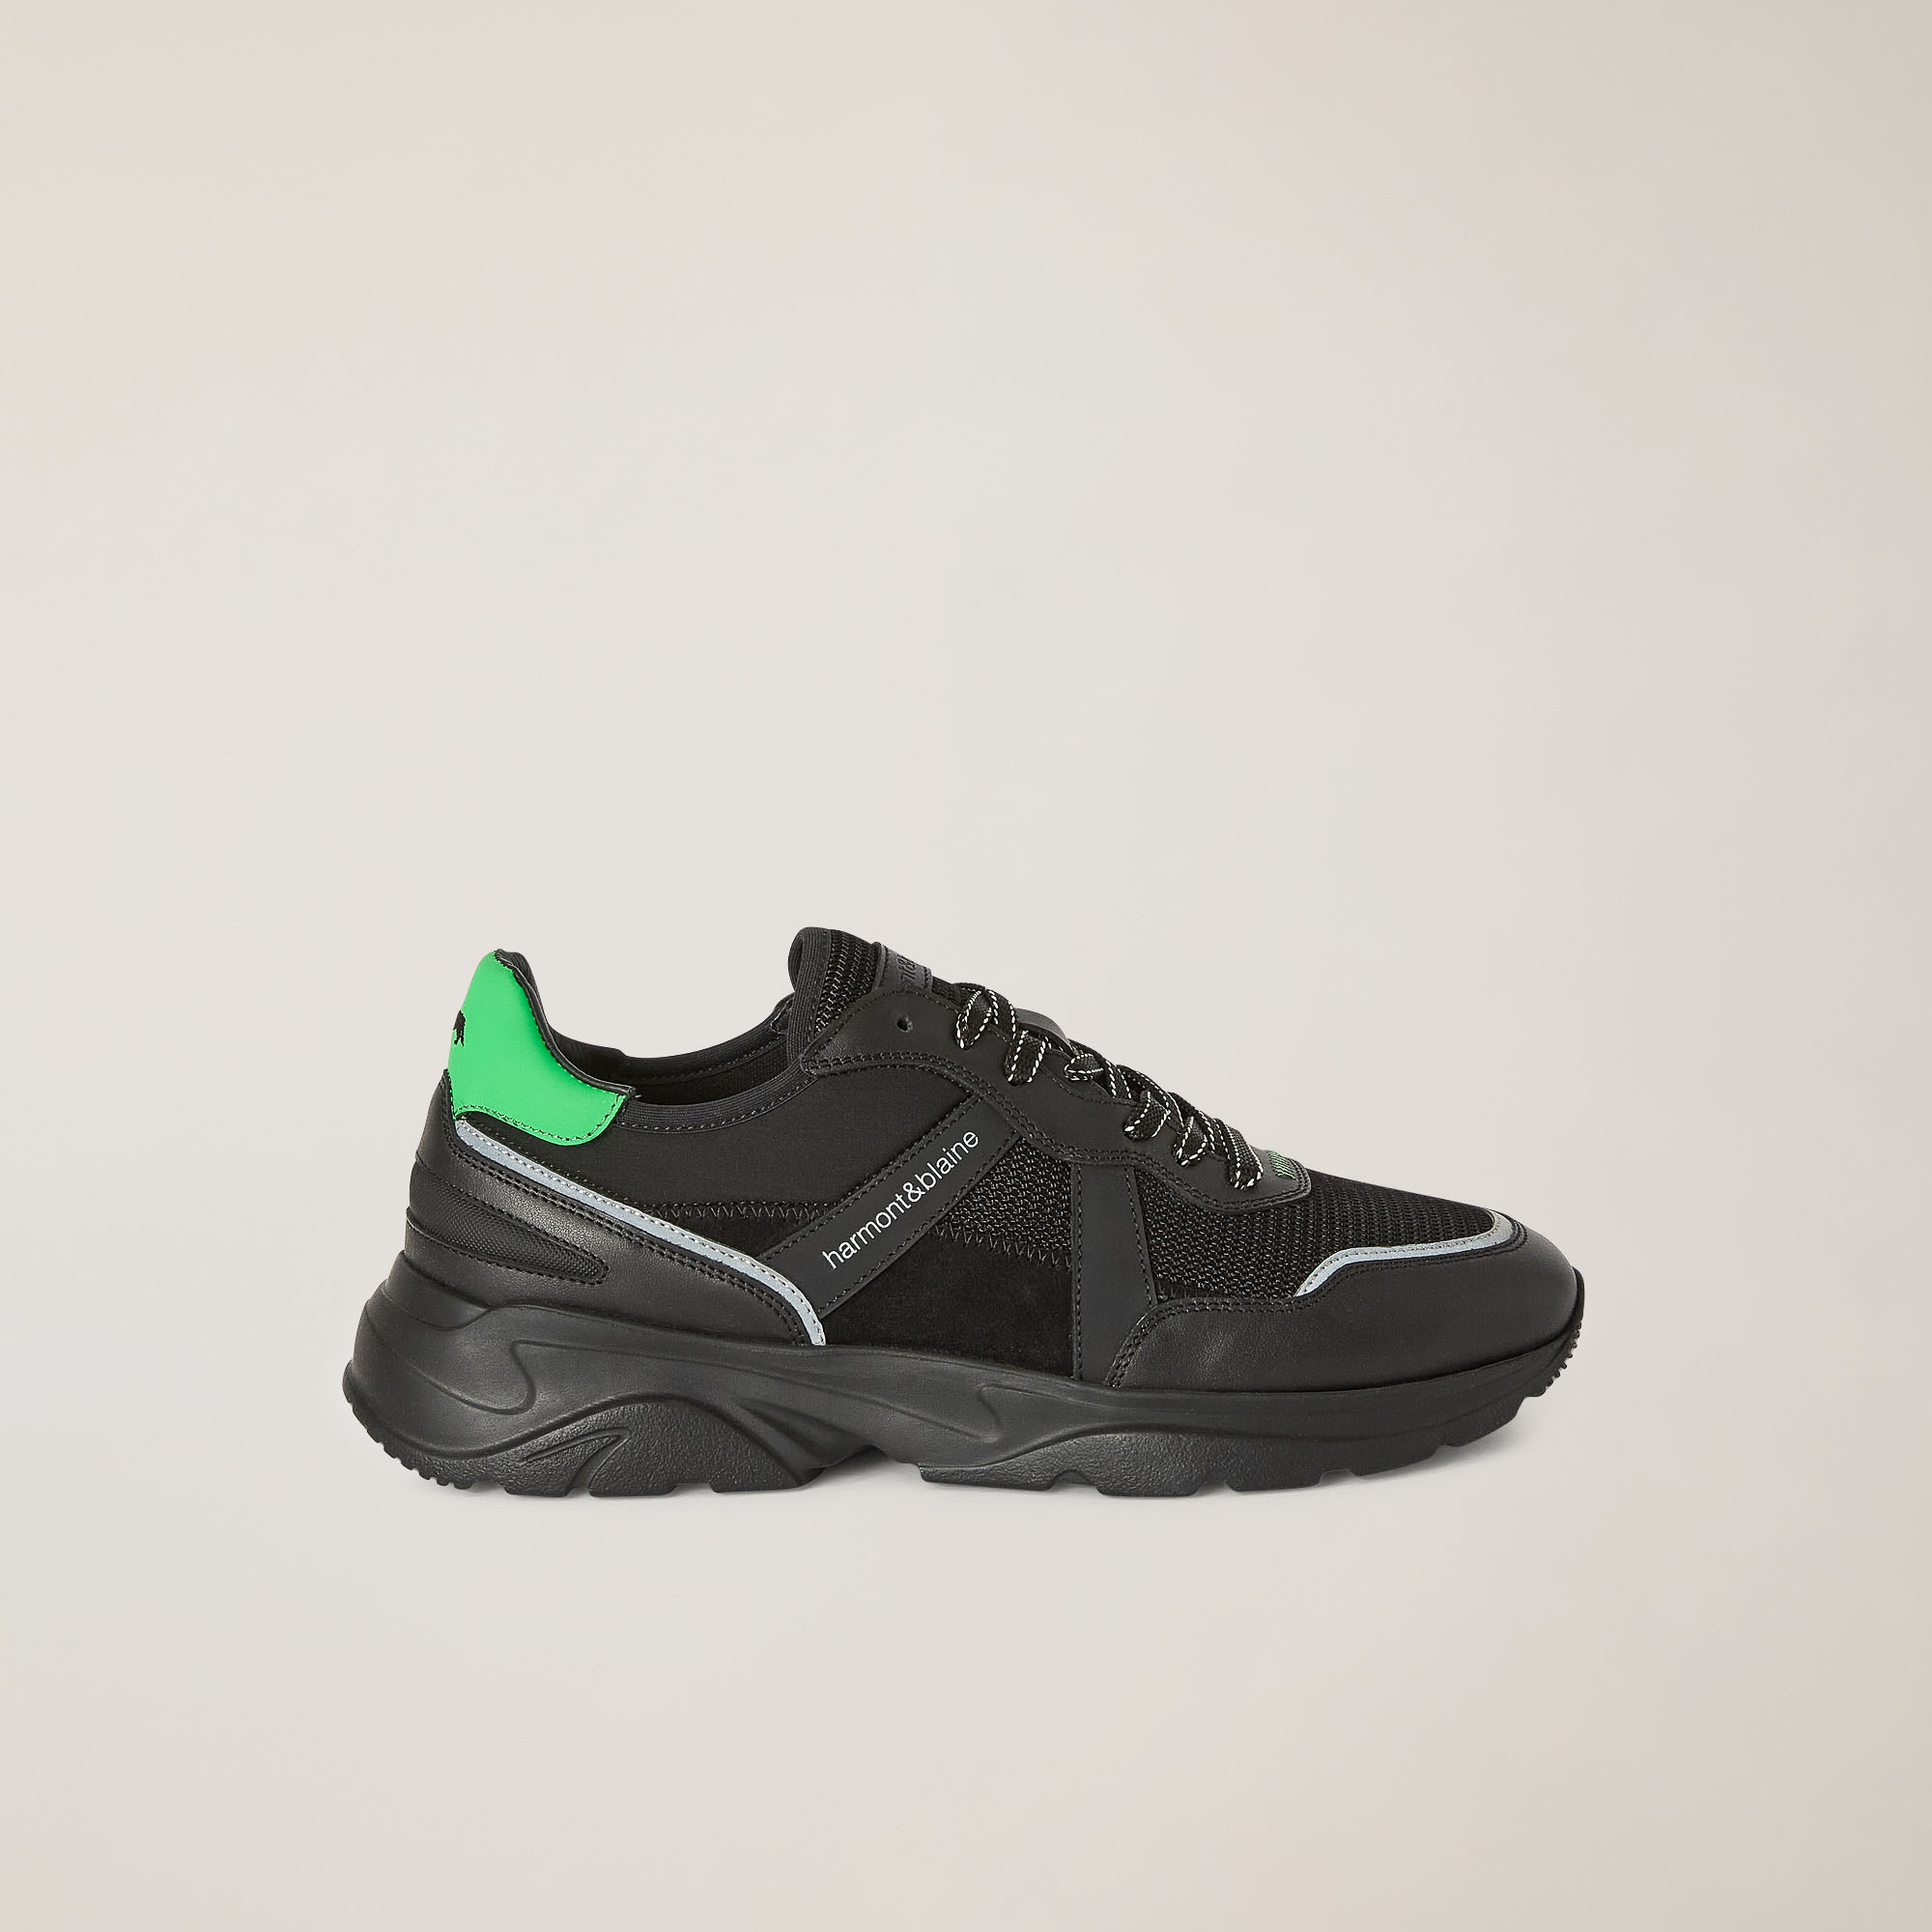 Leather And Fabric Running Sneakers, Black/Green, large